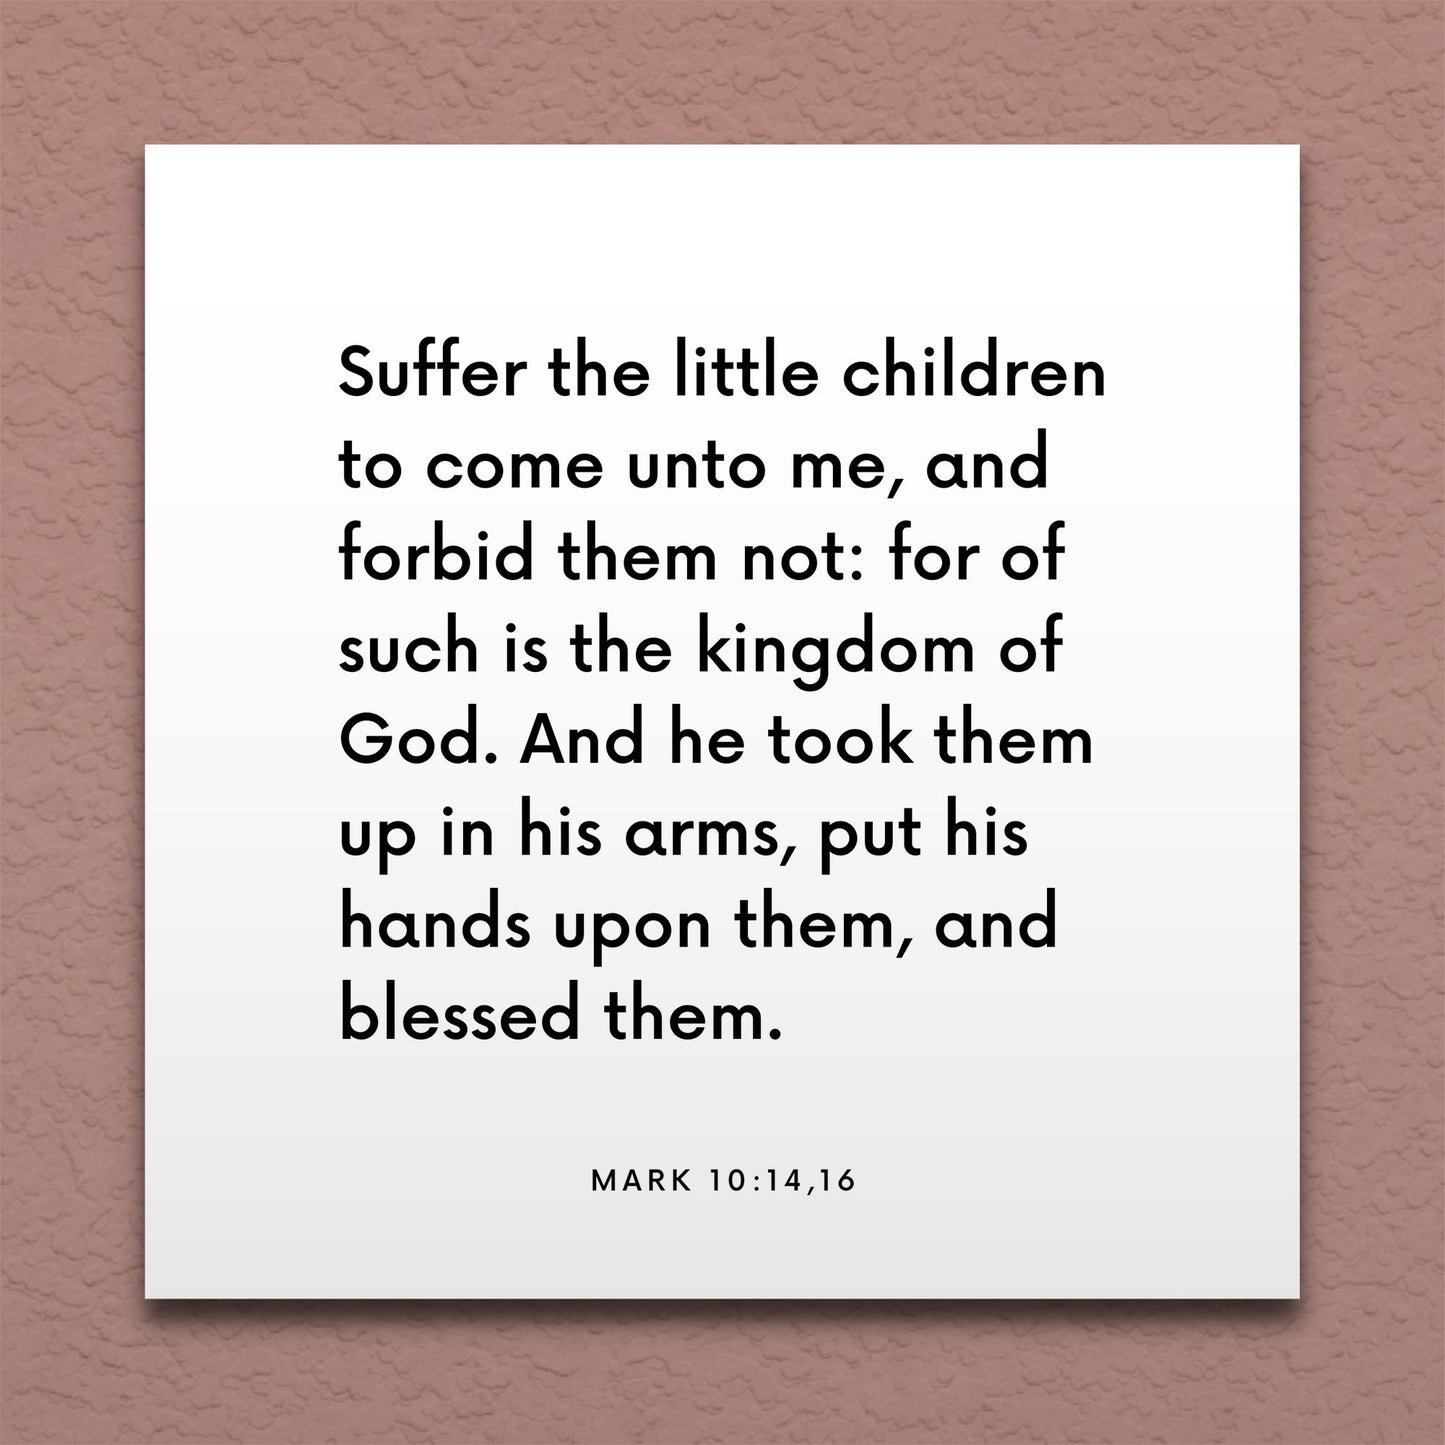 Wall-mounted scripture tile for Mark 10:14,16 - "Suffer the little children to come unto me"